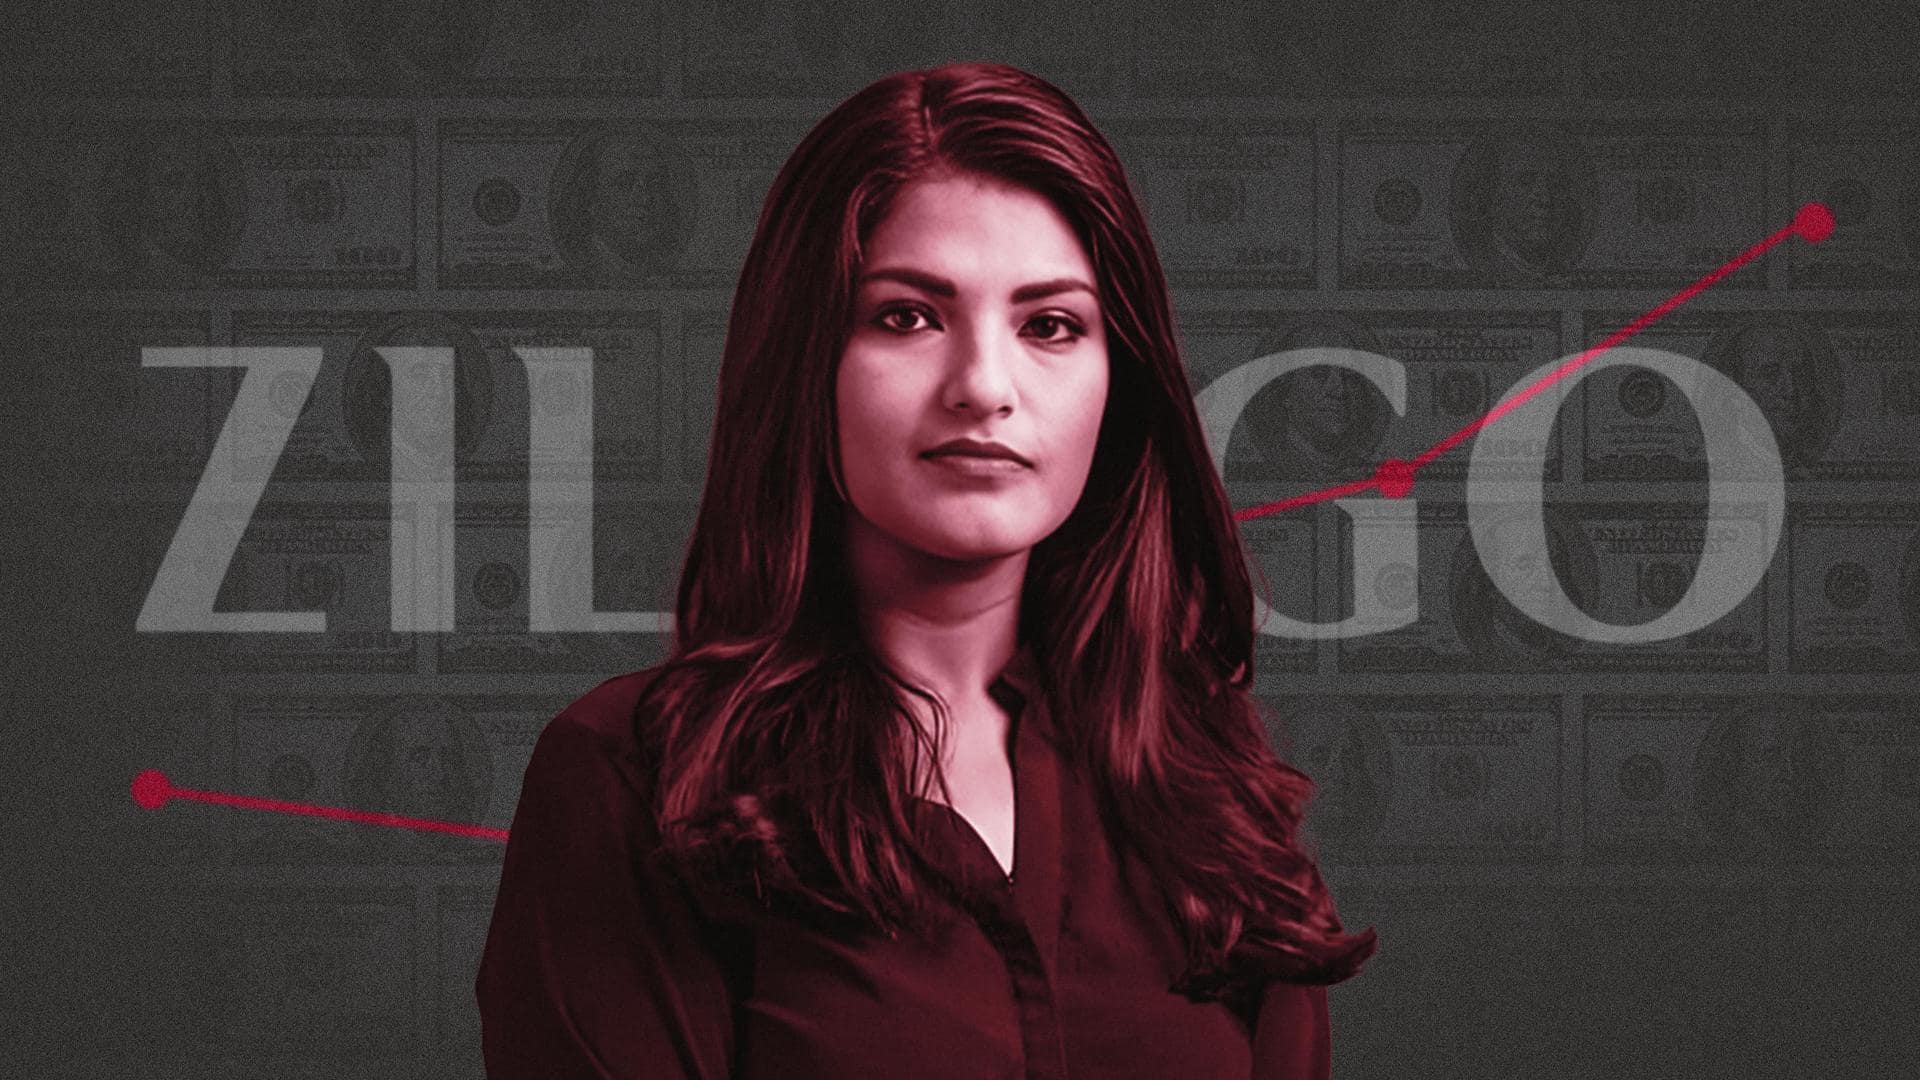 Zilingo's ex-CEO Ankiti Bose files $100M defamation suit: Here's why